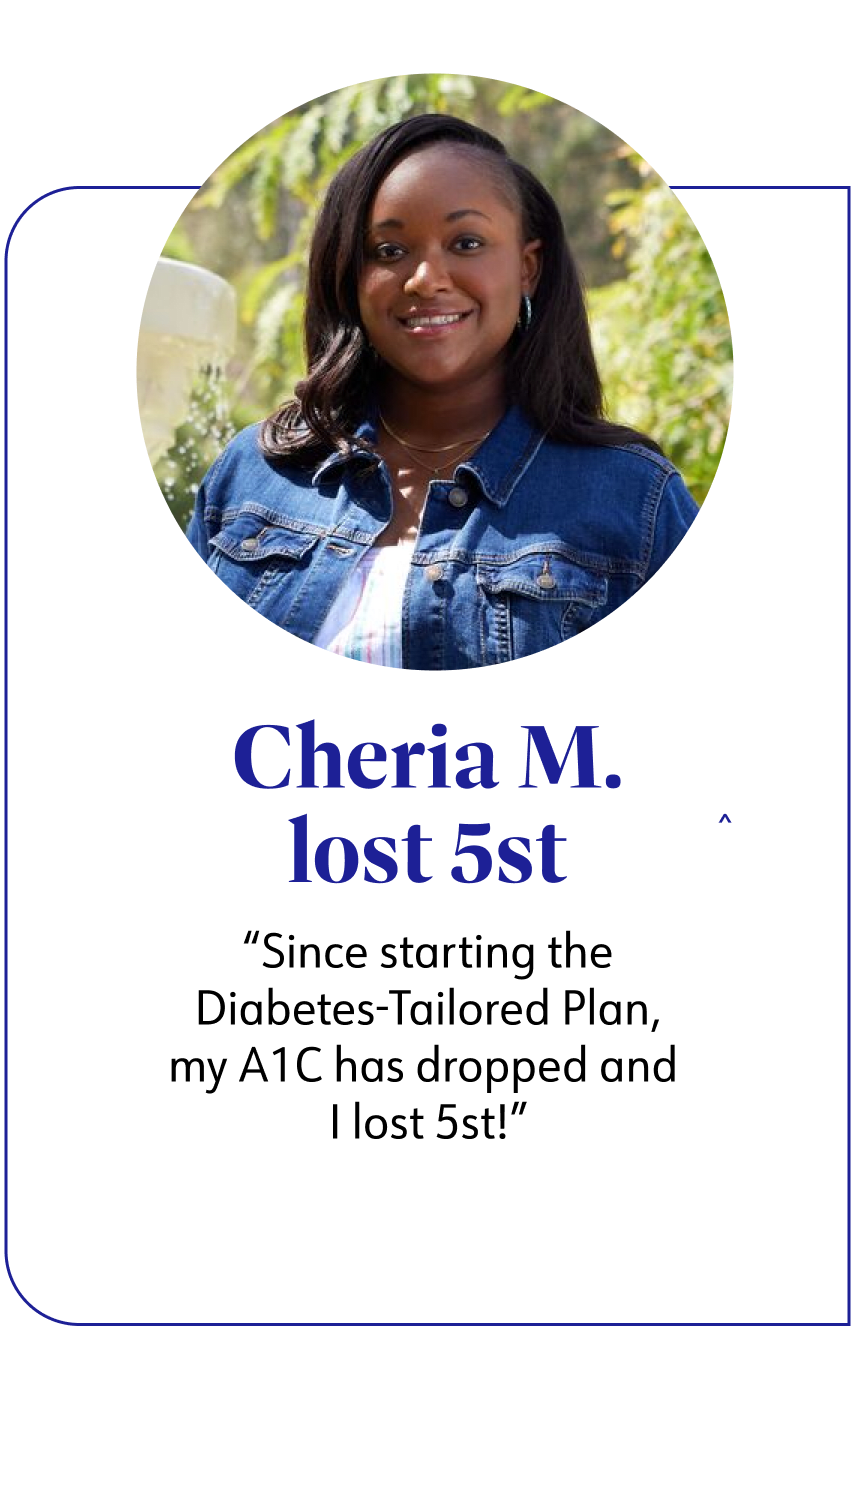 WW member Cheria lost 5st since starting the diabetes-tailored plan, my ATC has dropped and i lost 5st!